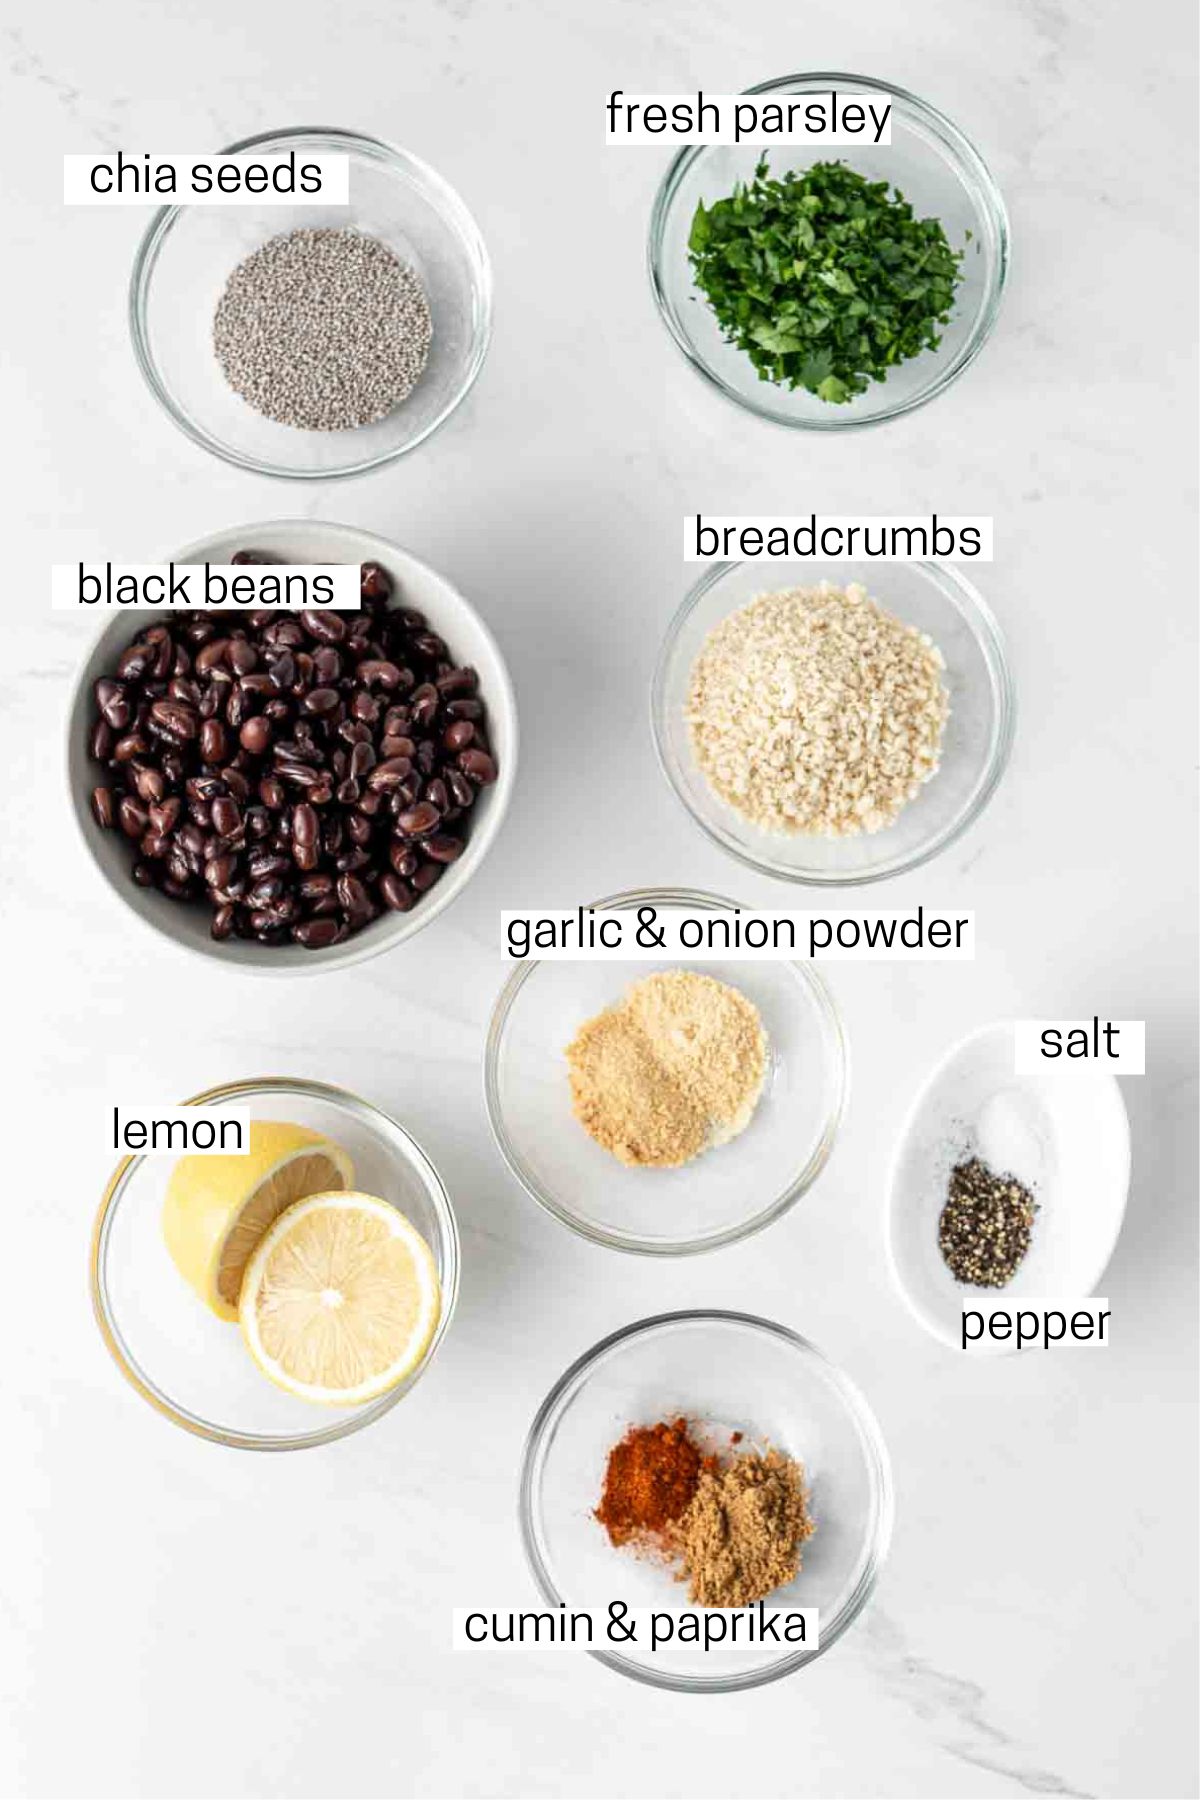 All ingredients needed to make black bean burgers laid out in small bowls.